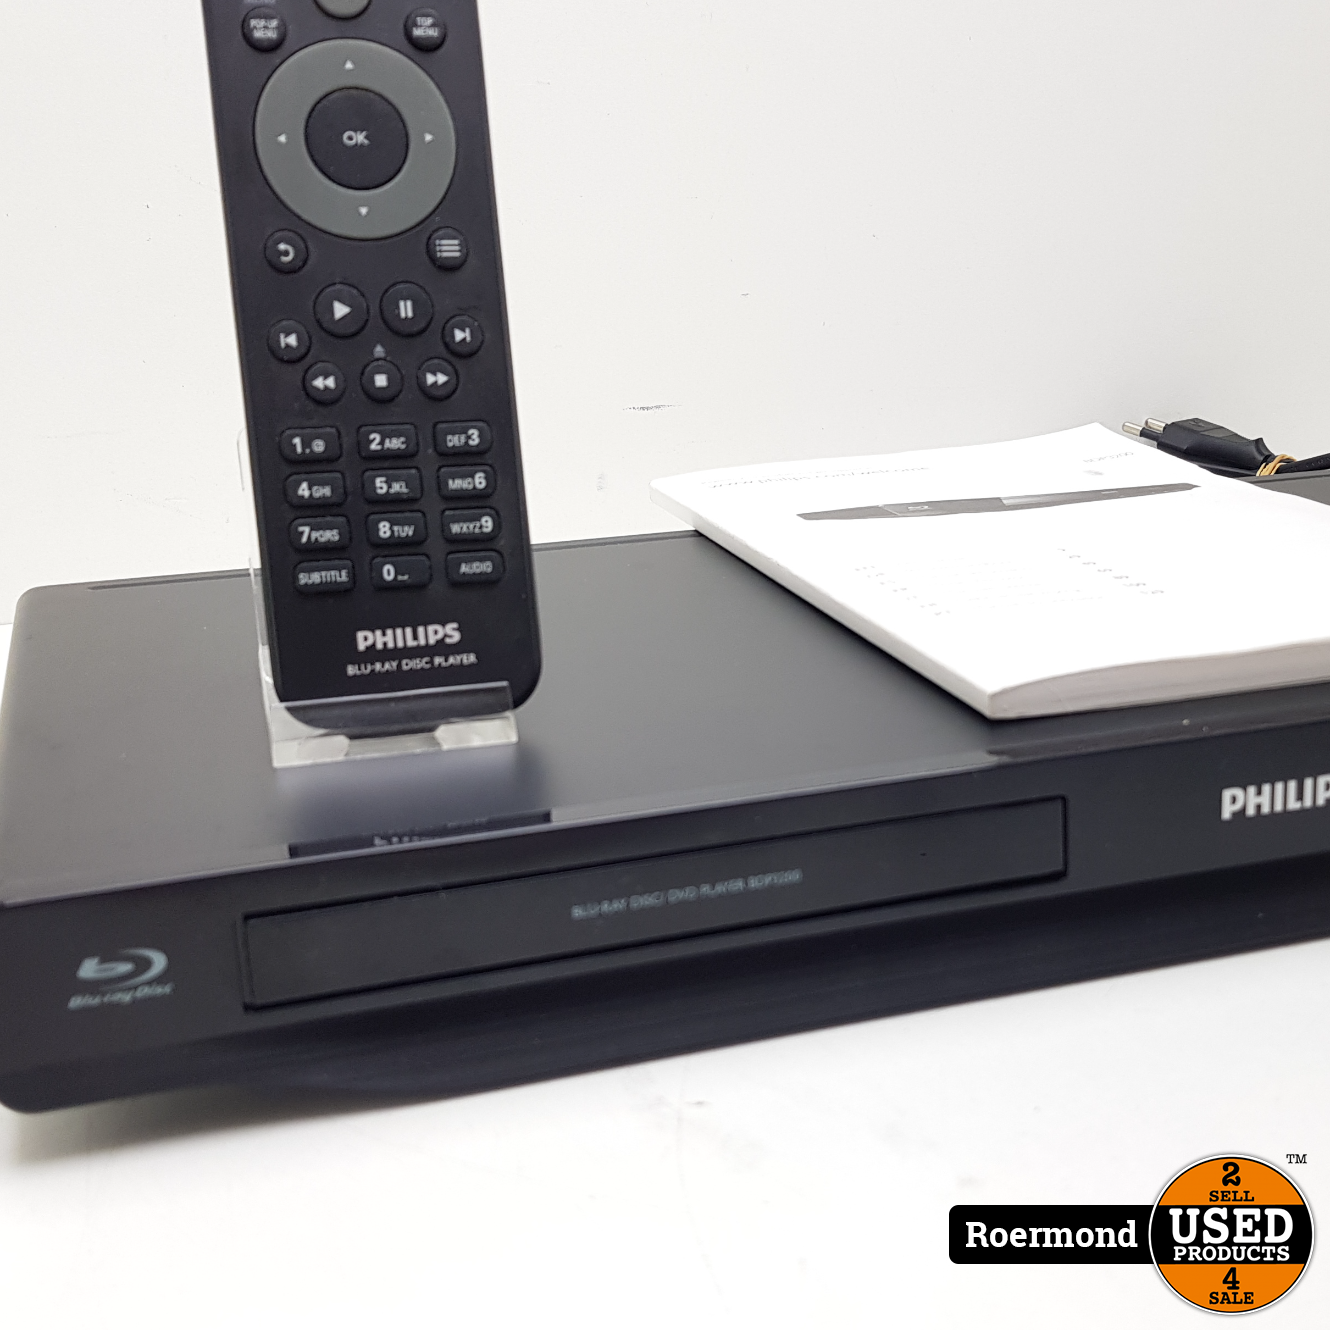 krans Ontrouw Precies philips Philips Blu-Ray Disc/DVD Player I Refurbished - Used Products  Roermond